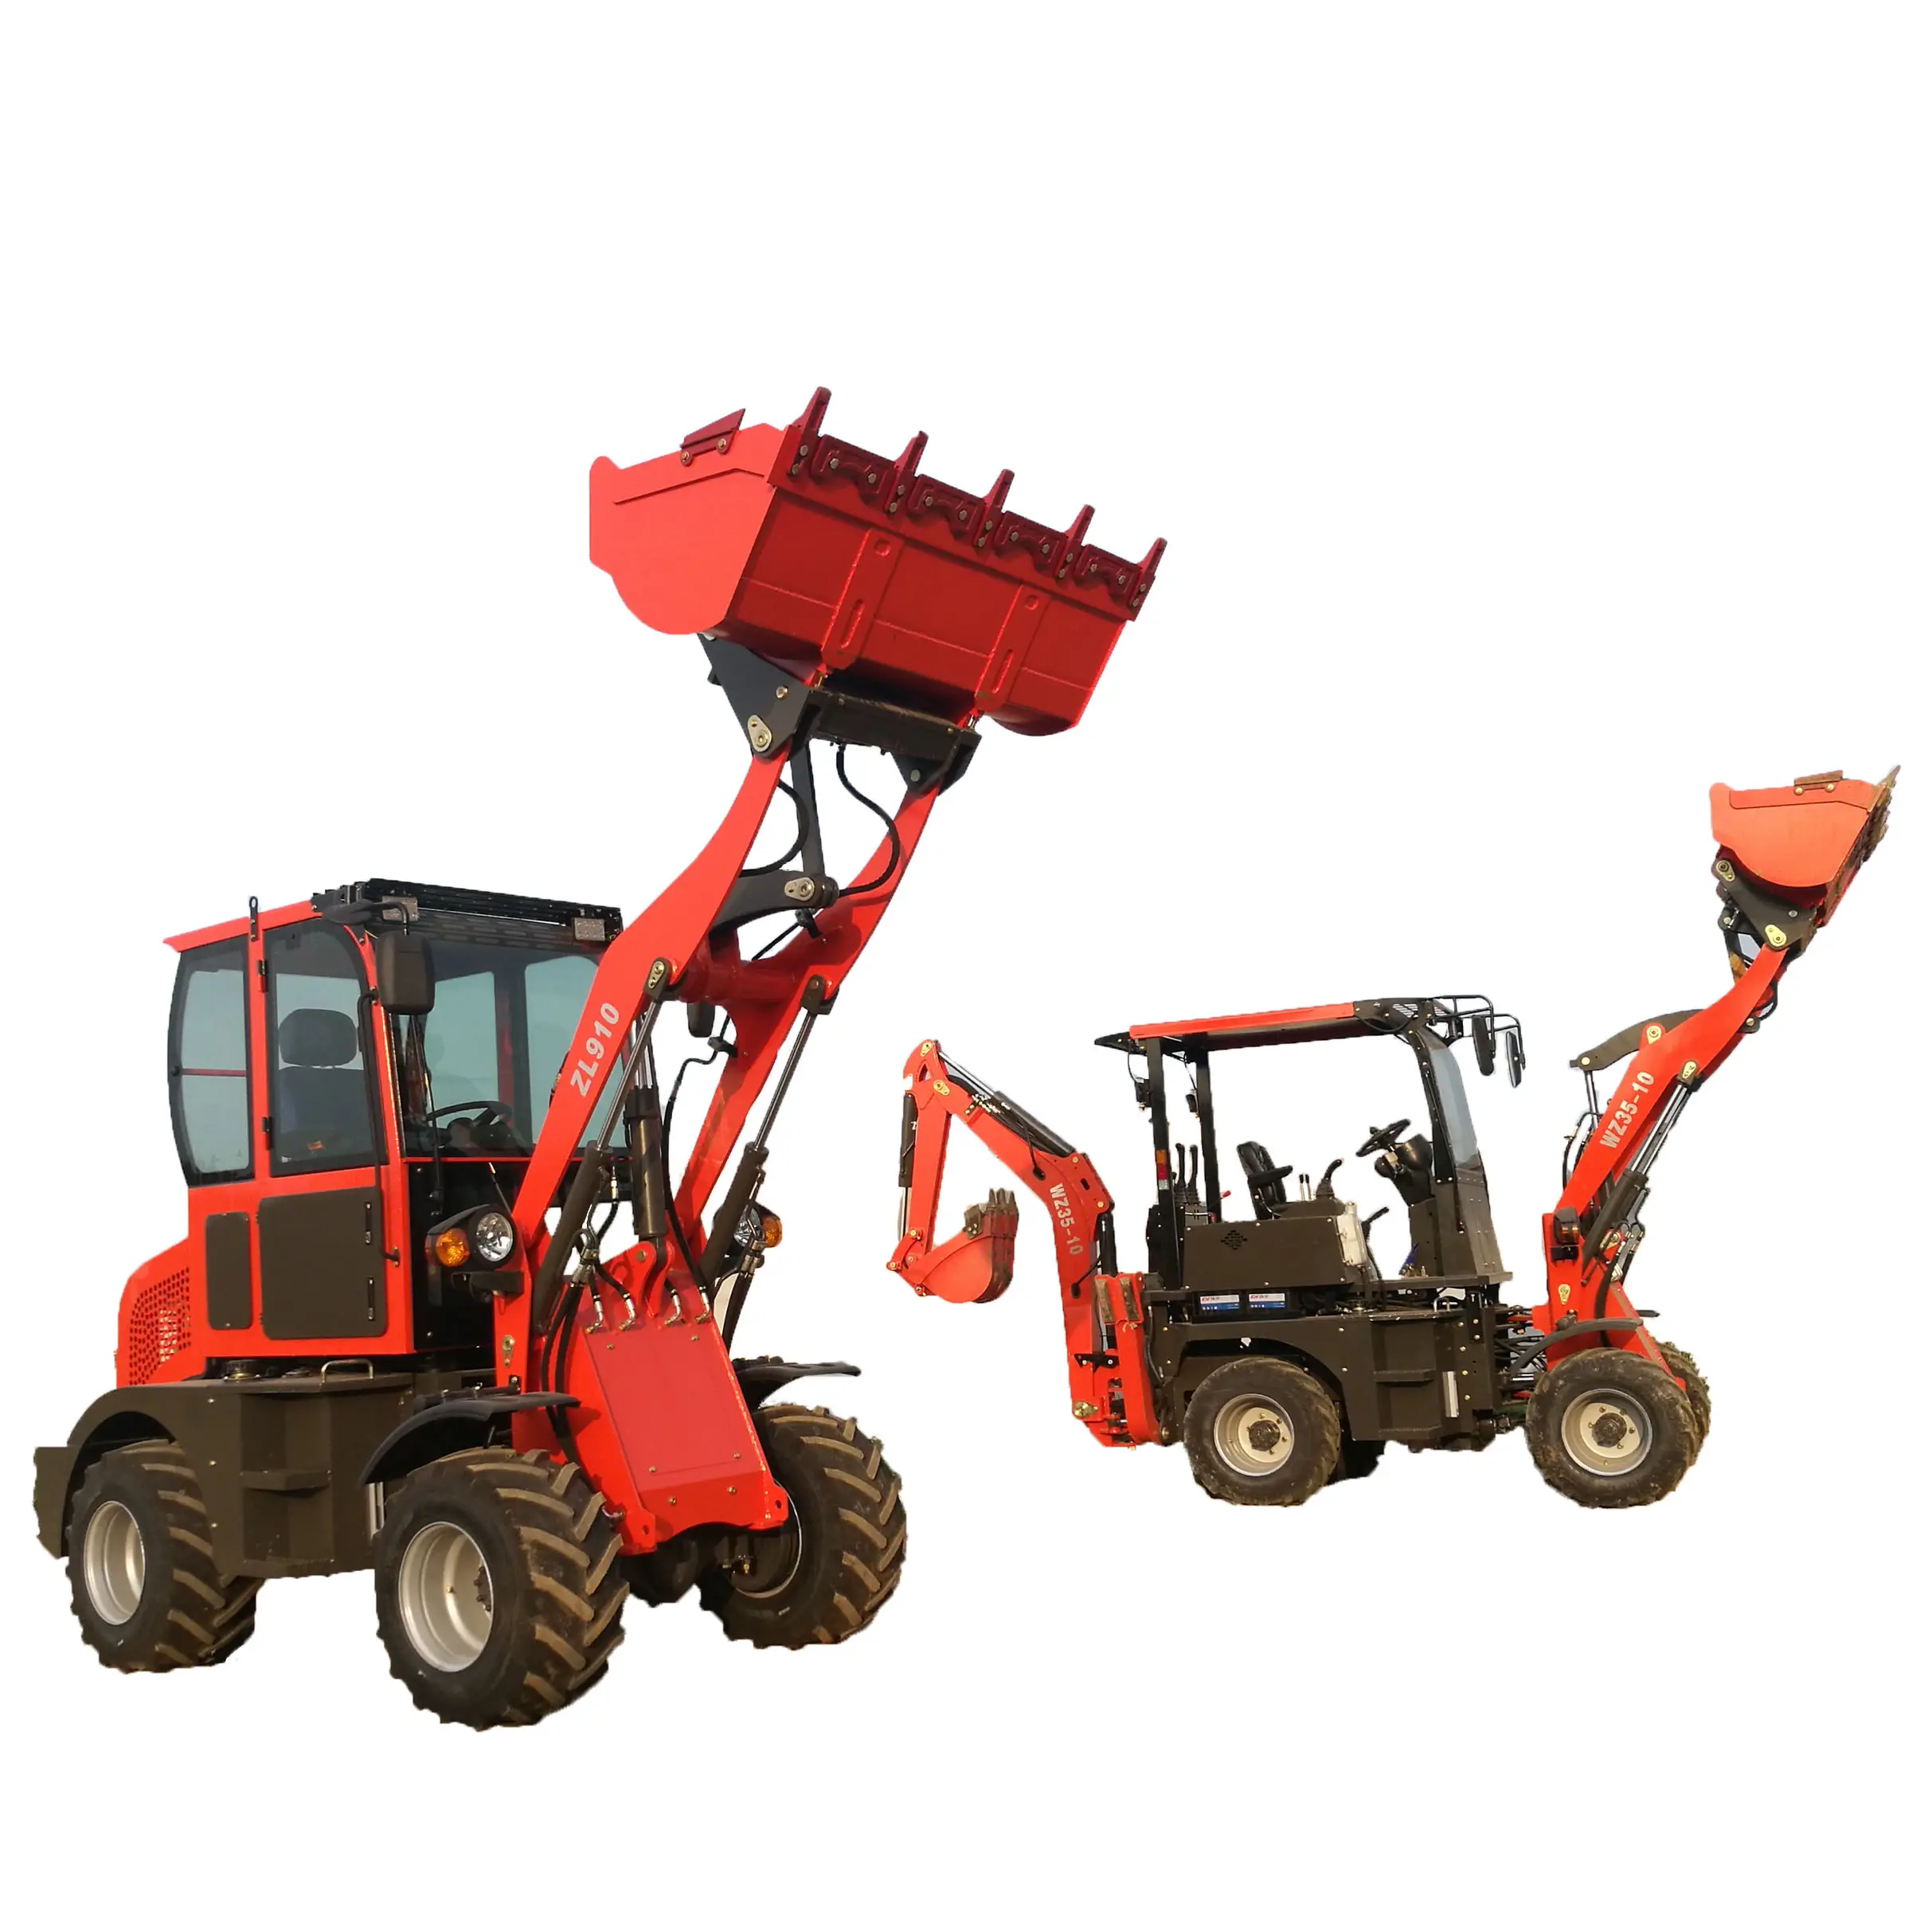 1 Ton Heavy Duty Backhoe Loader with Large Bucket Capacity Wheel Excavator Used for Home Use Motor Pump Gearbox Core Components